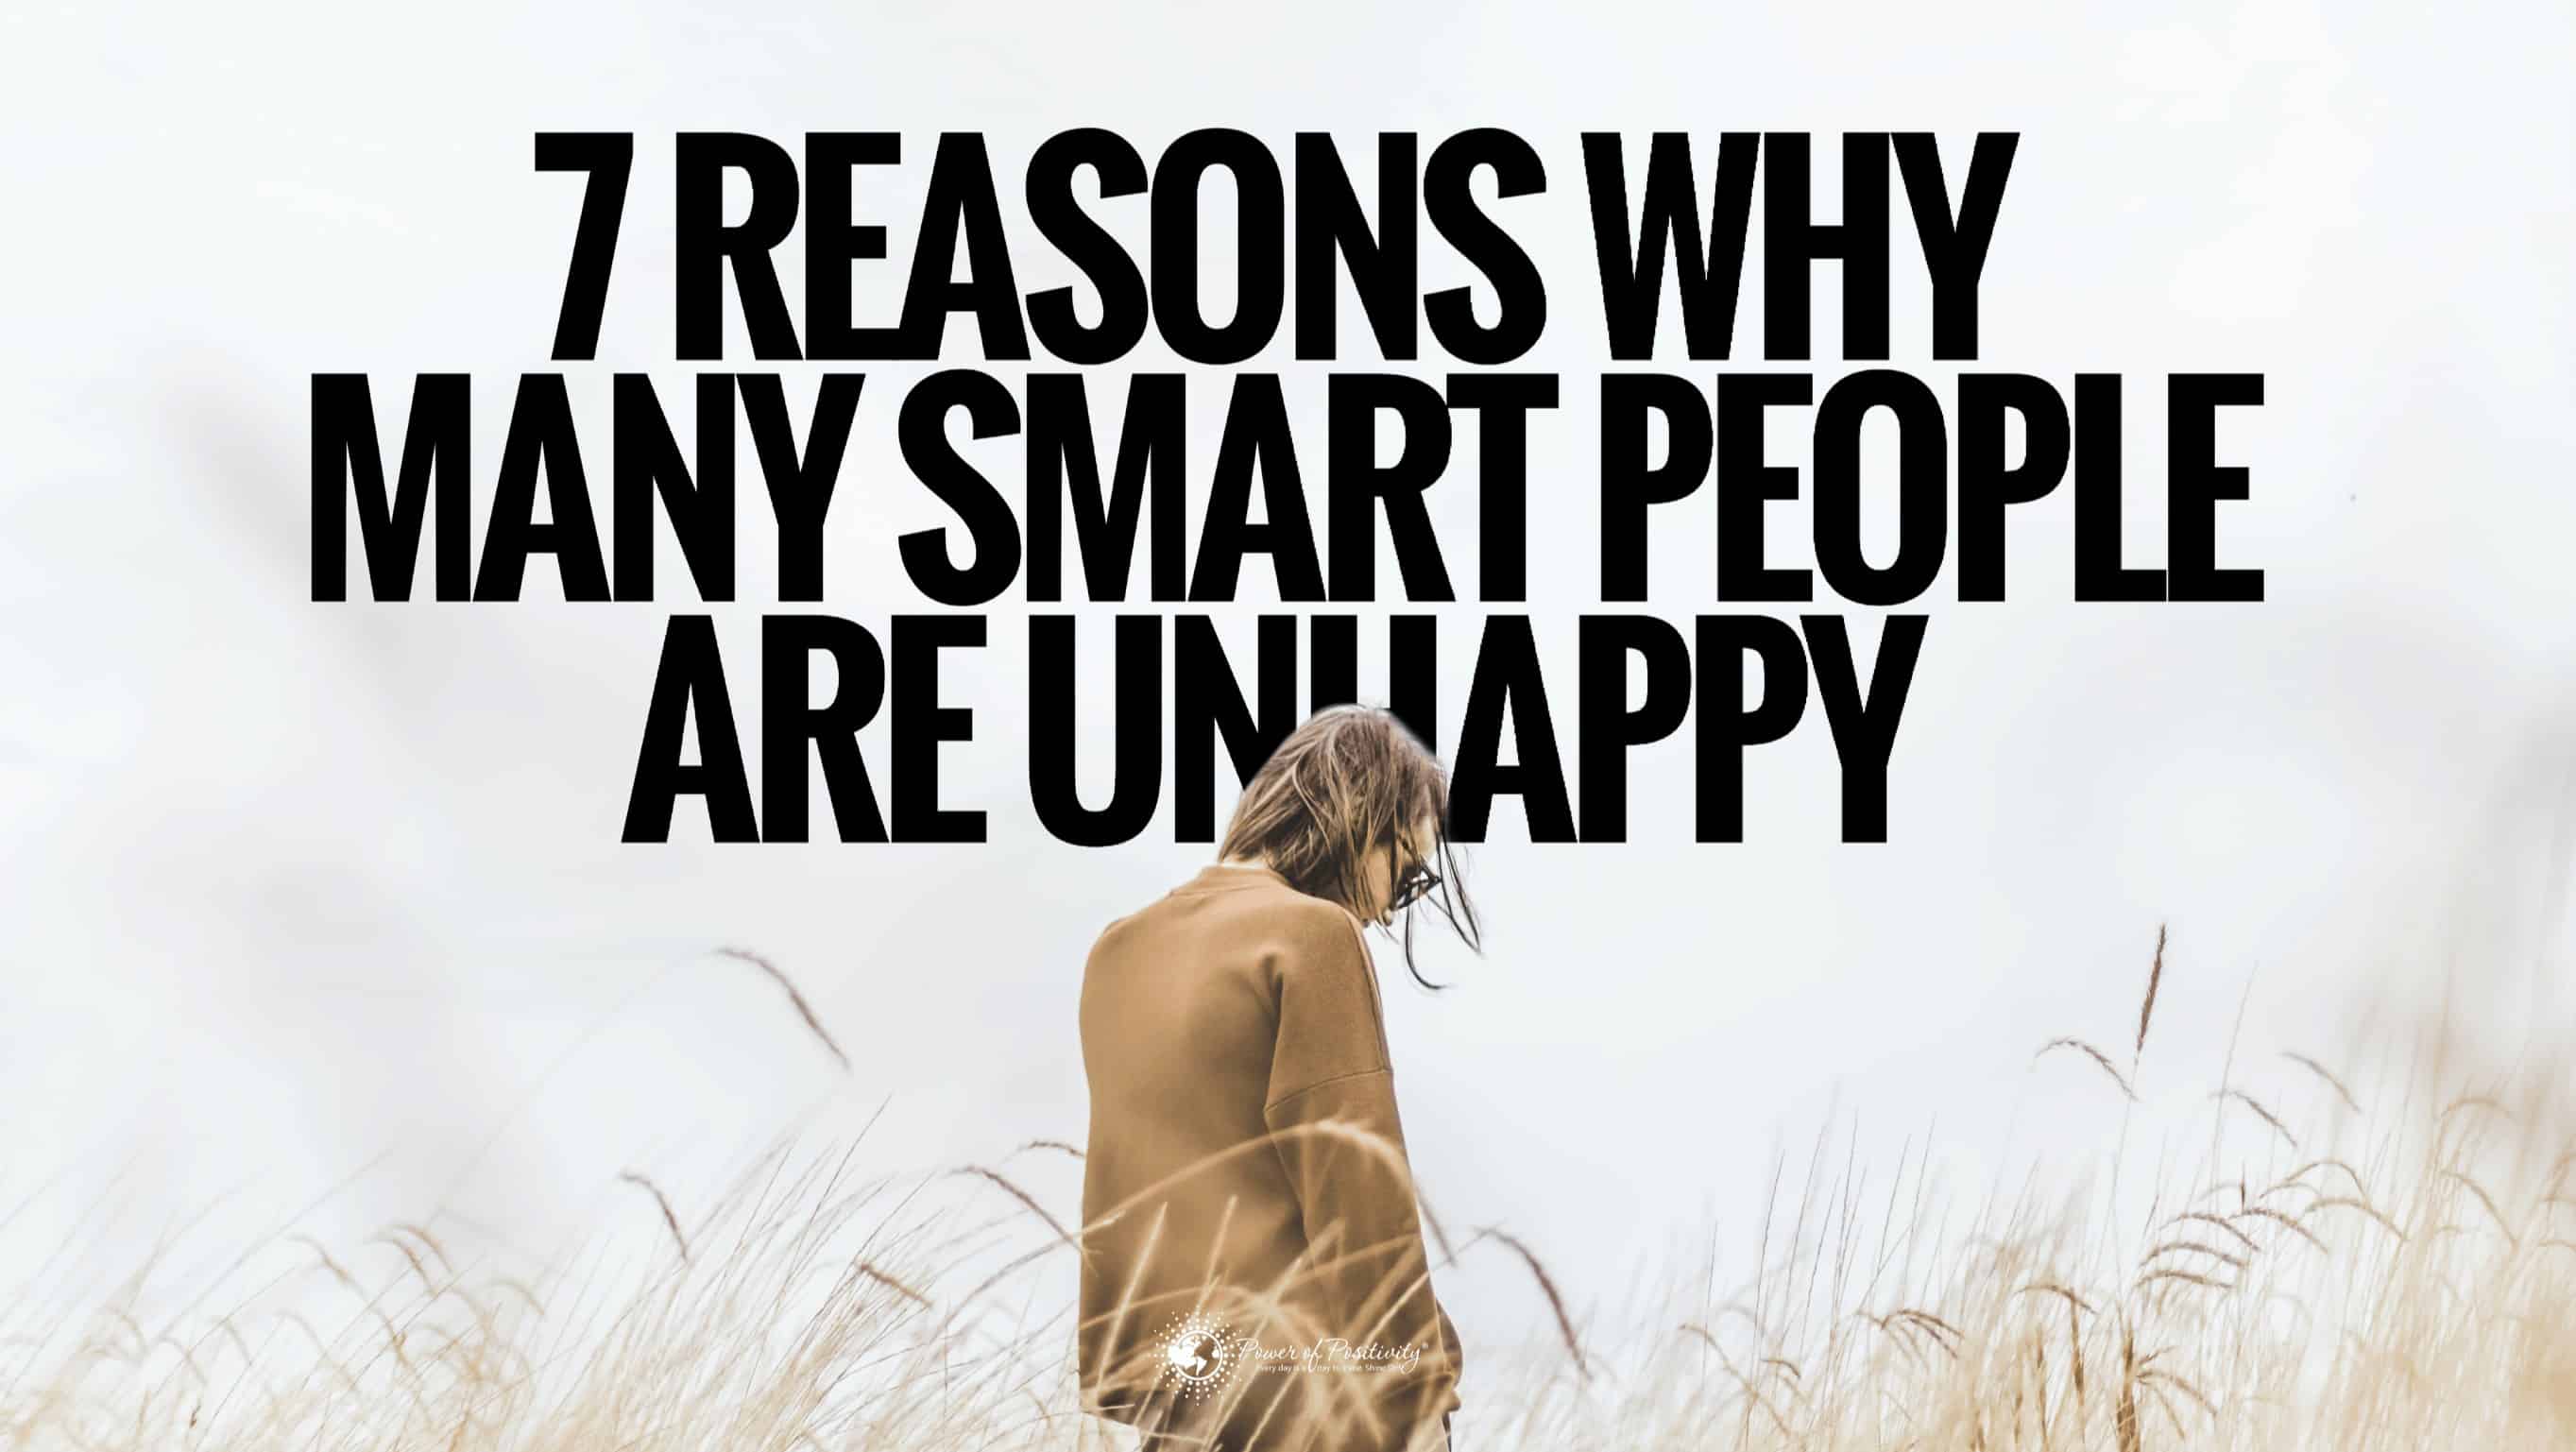 7 Reasons Why Many Smart People are Unhappy